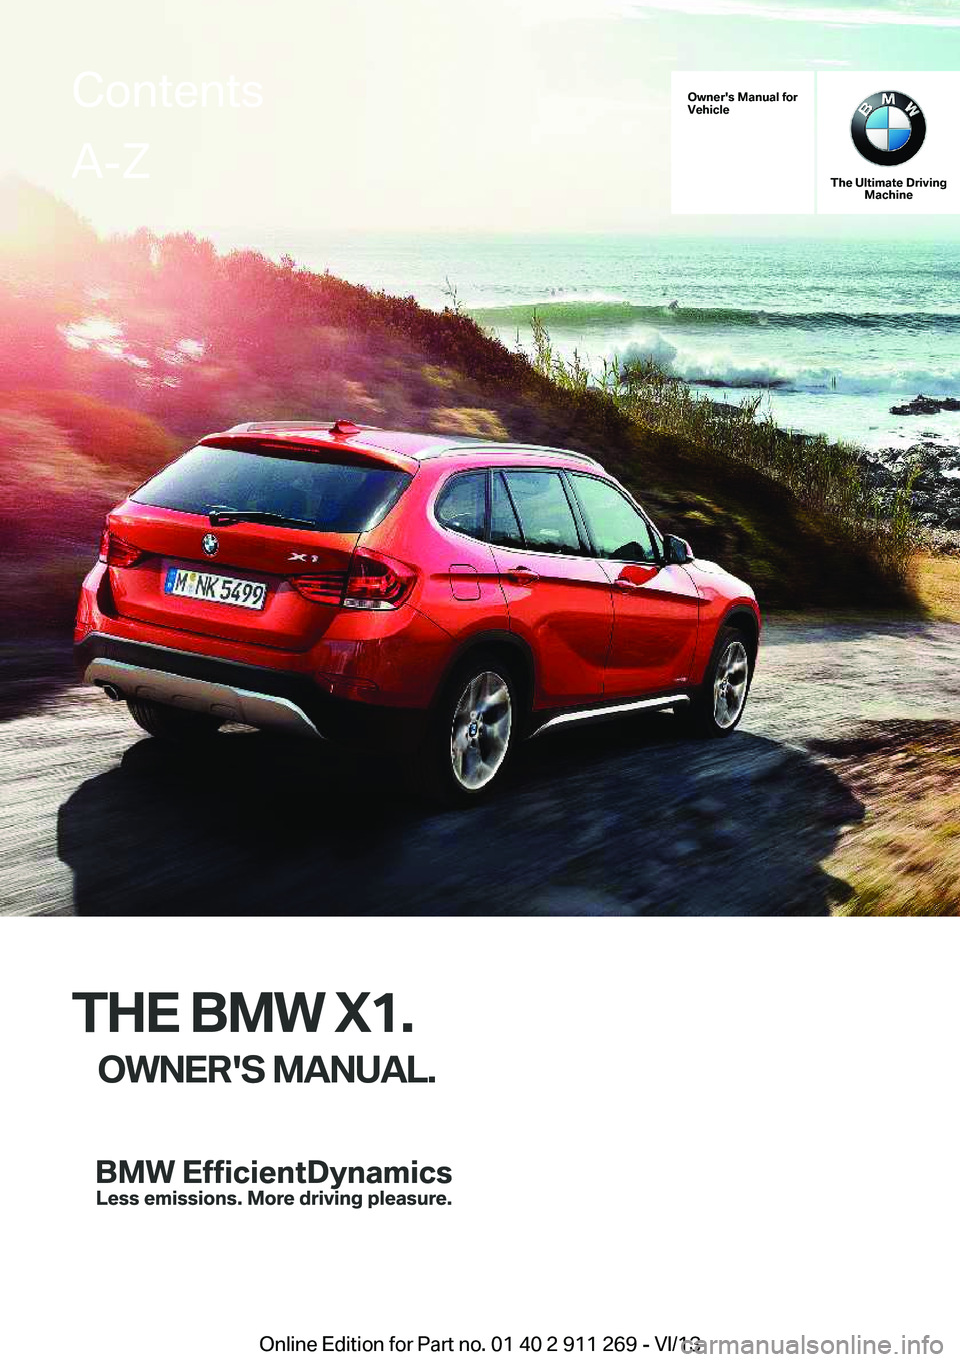 BMW X1 SDRIVE28I 2014  Owners Manual Owner's Manual for
Vehicle
The Ultimate Driving Machine
THE BMW X1.
OWNER'S MANUAL.
ContentsA-Z
Online Edition for Part no. 01 40 2 911 269 - VI/13   